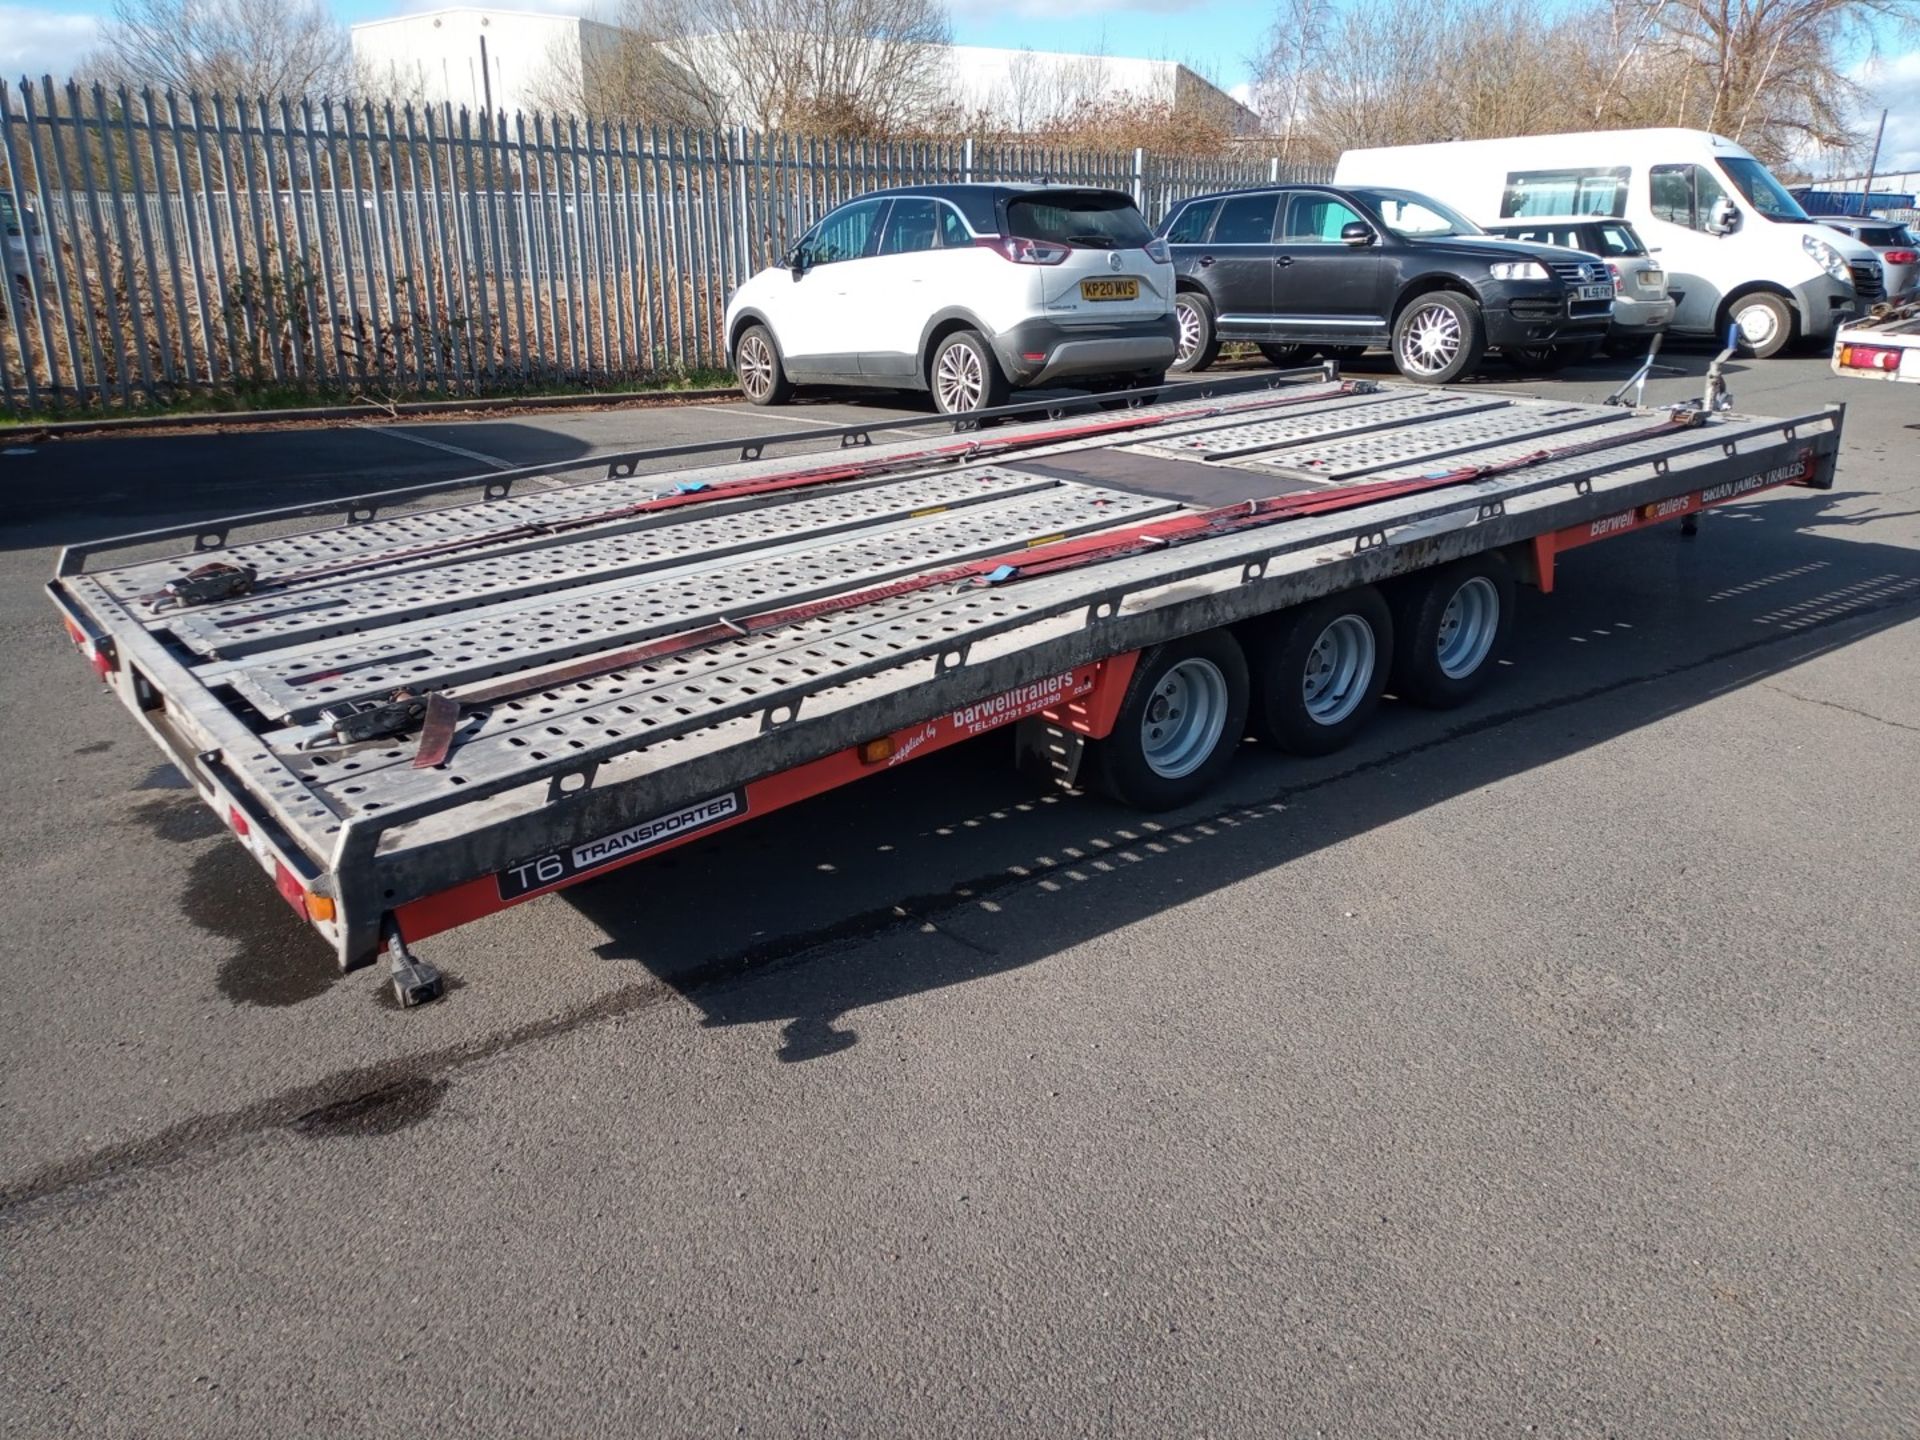 December 2021 Brian James 5m T6 Trailer With Crossover Ramps - Image 3 of 11